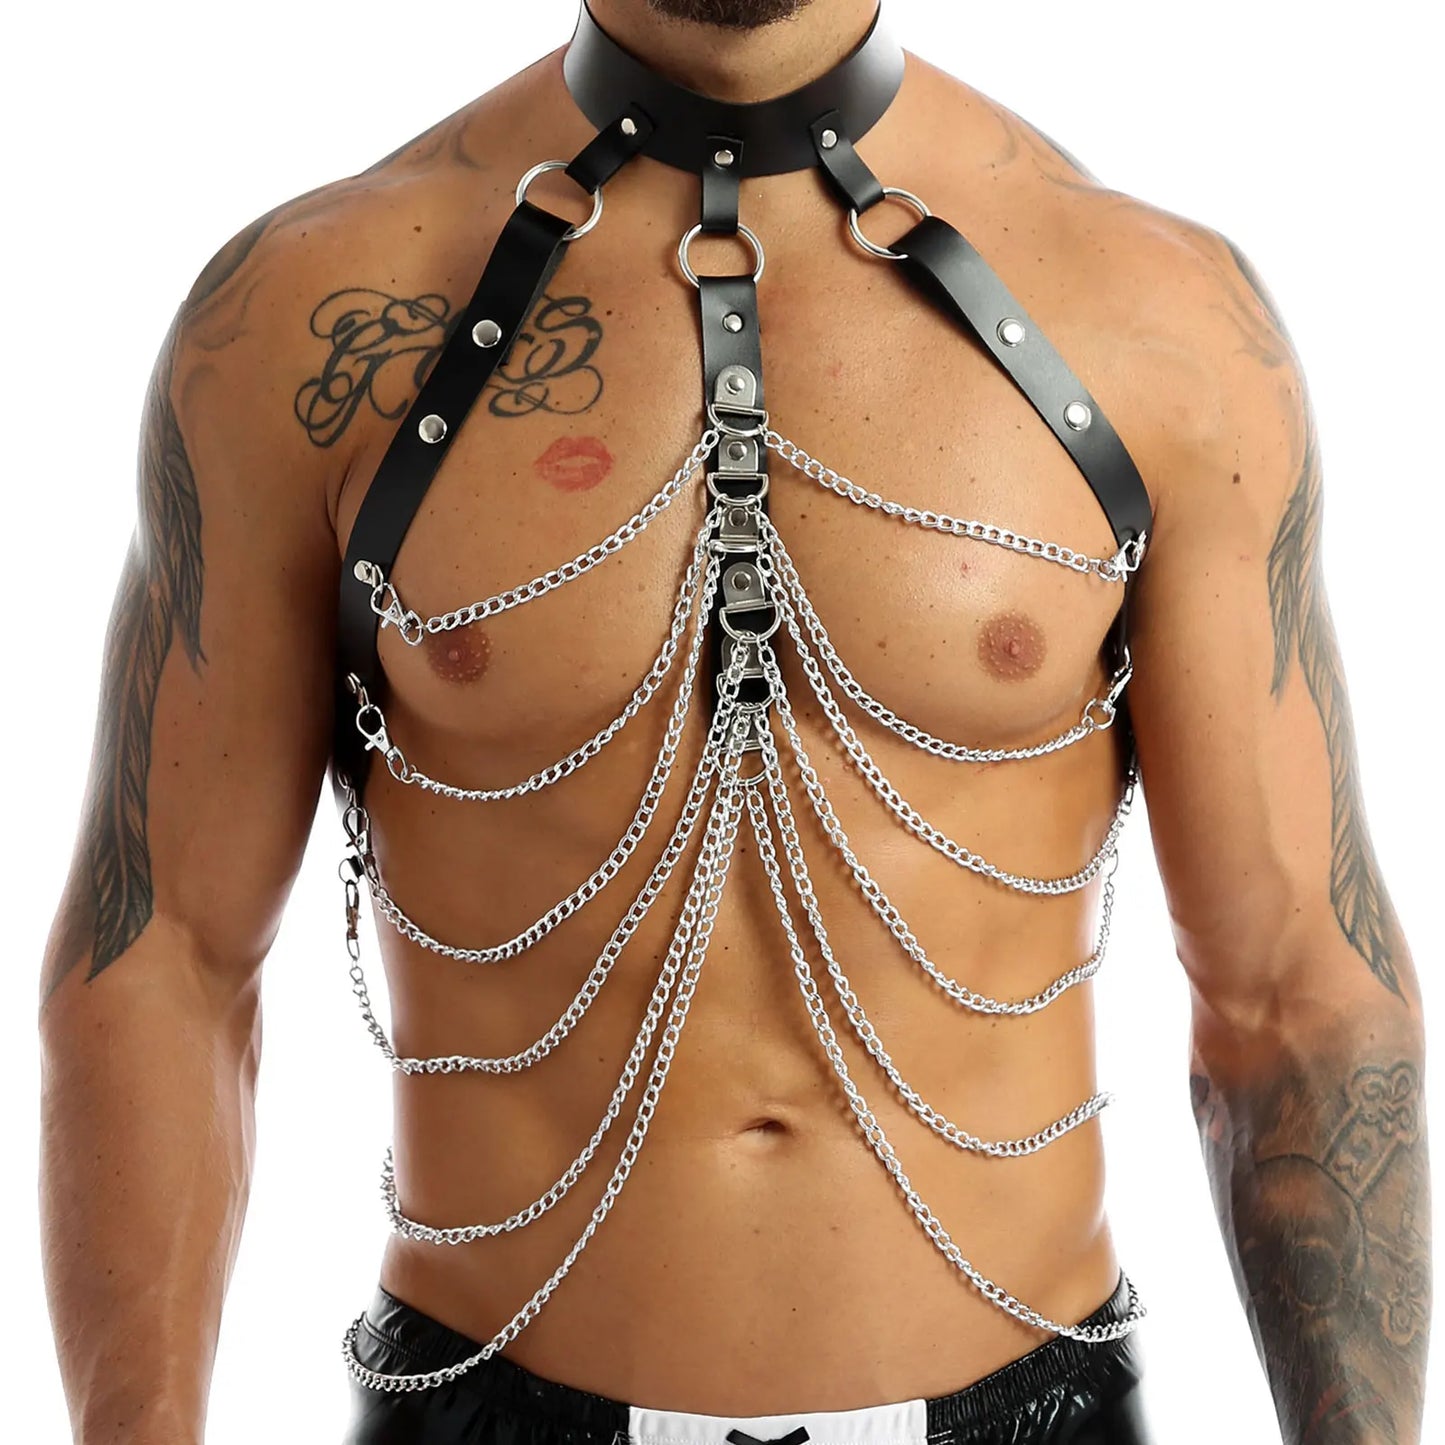 Men Sword belt Faux Leather Body Chest Chain Harness Punk Male Leather Bondage Costume Sexy Toy Gay Club Rave Straps Crop Top